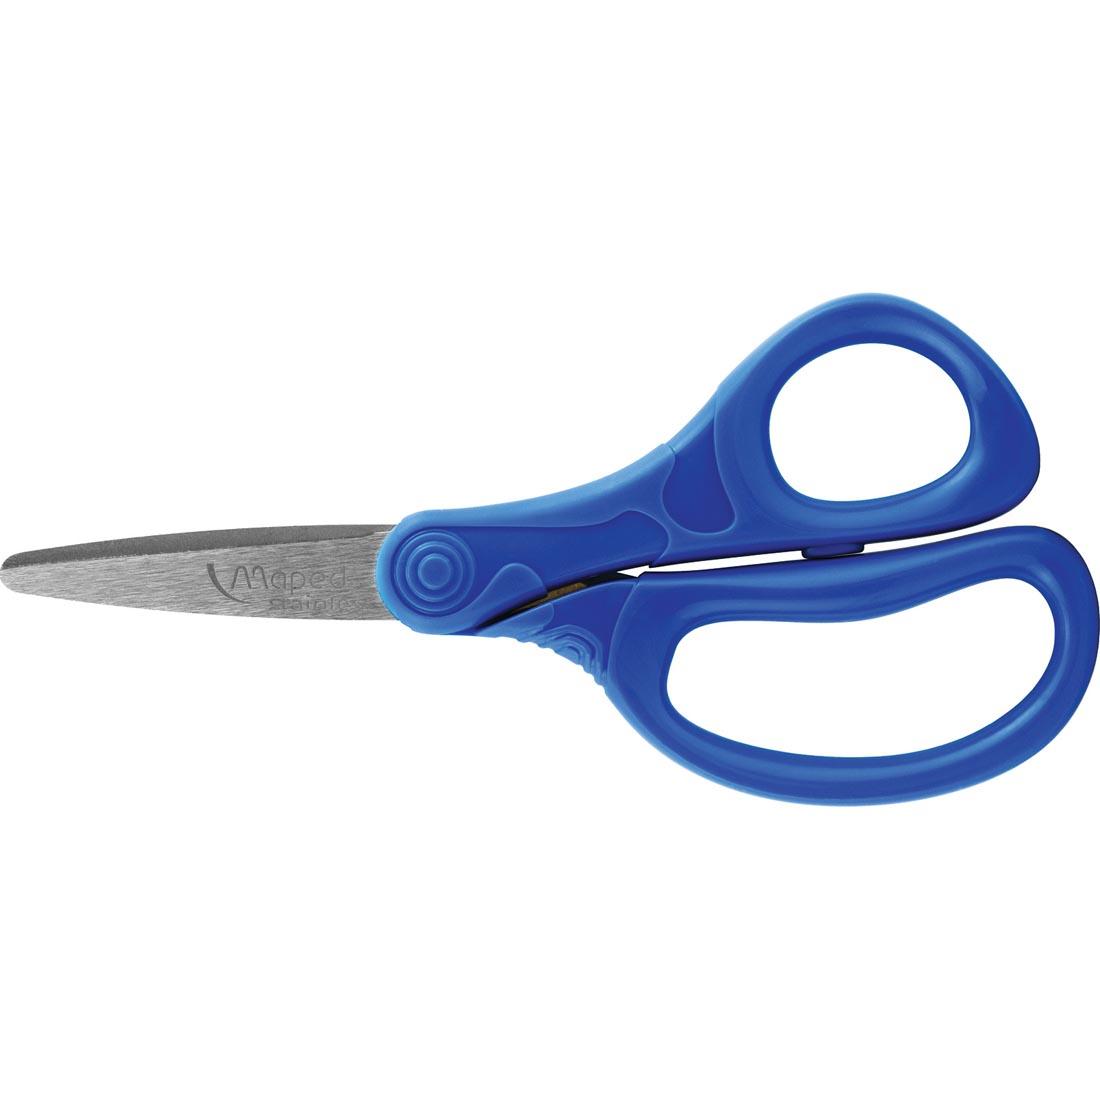 one pair of scissors from the Maped School Scissors Pointed 12-Count Package